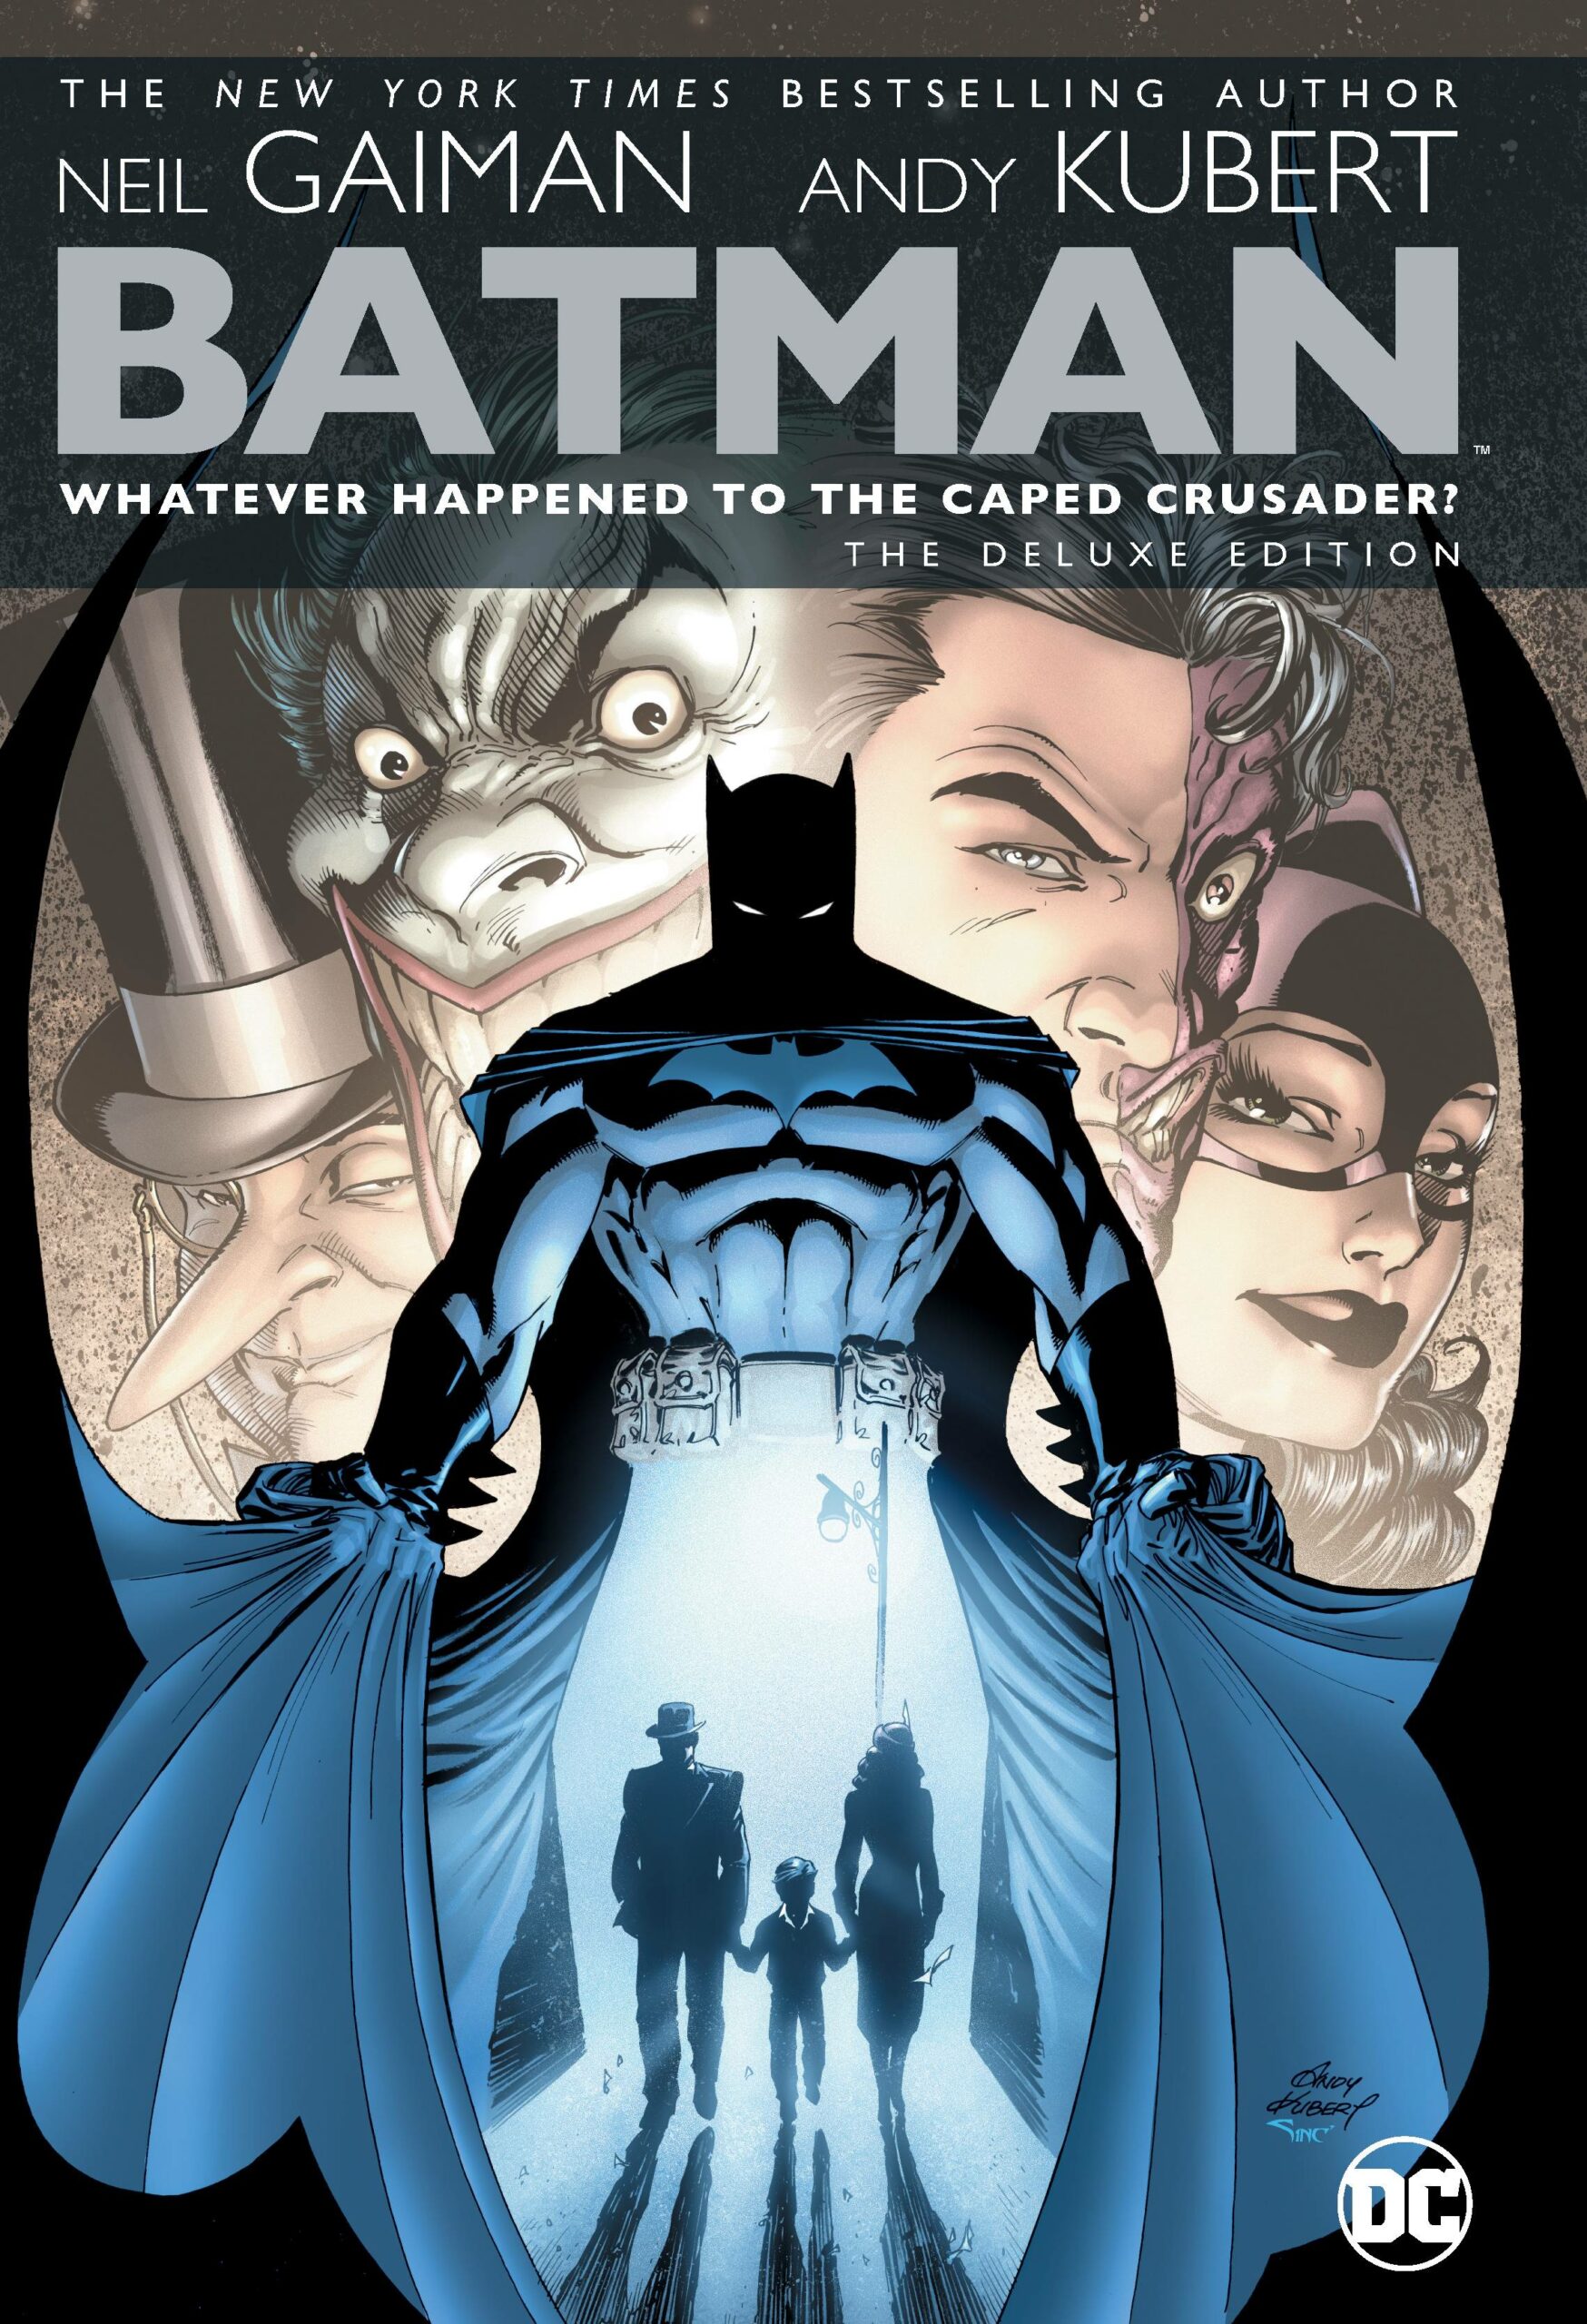 BATMAN WHATEVER HAPPENED TO THE CAPED CRUSADER 2020 DLX HC